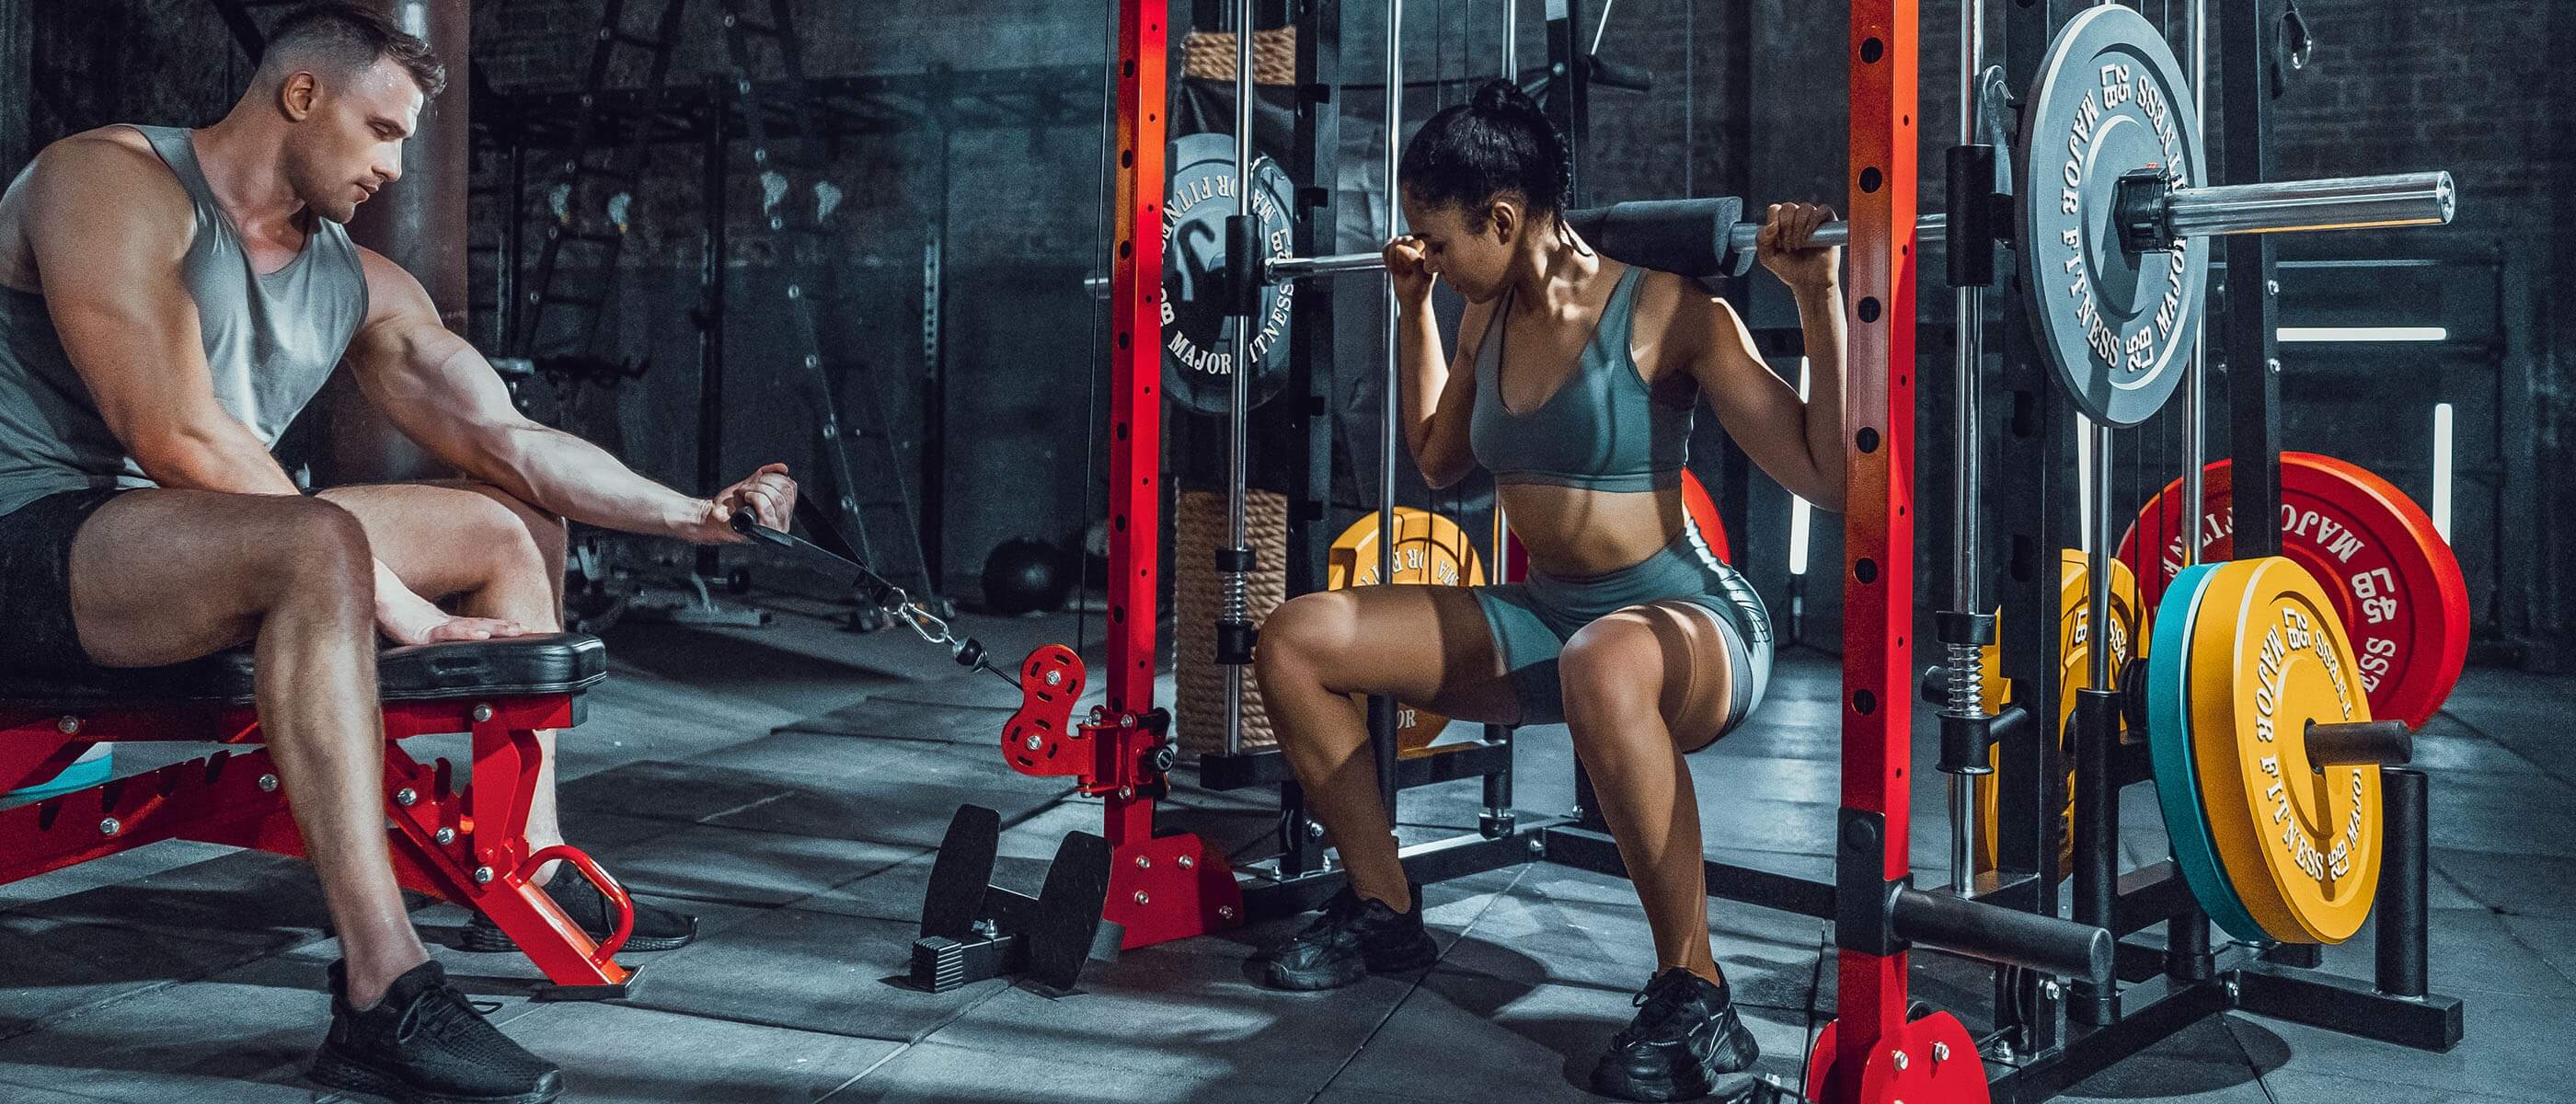 a man using a rowing machine and a woman squatting at a gym